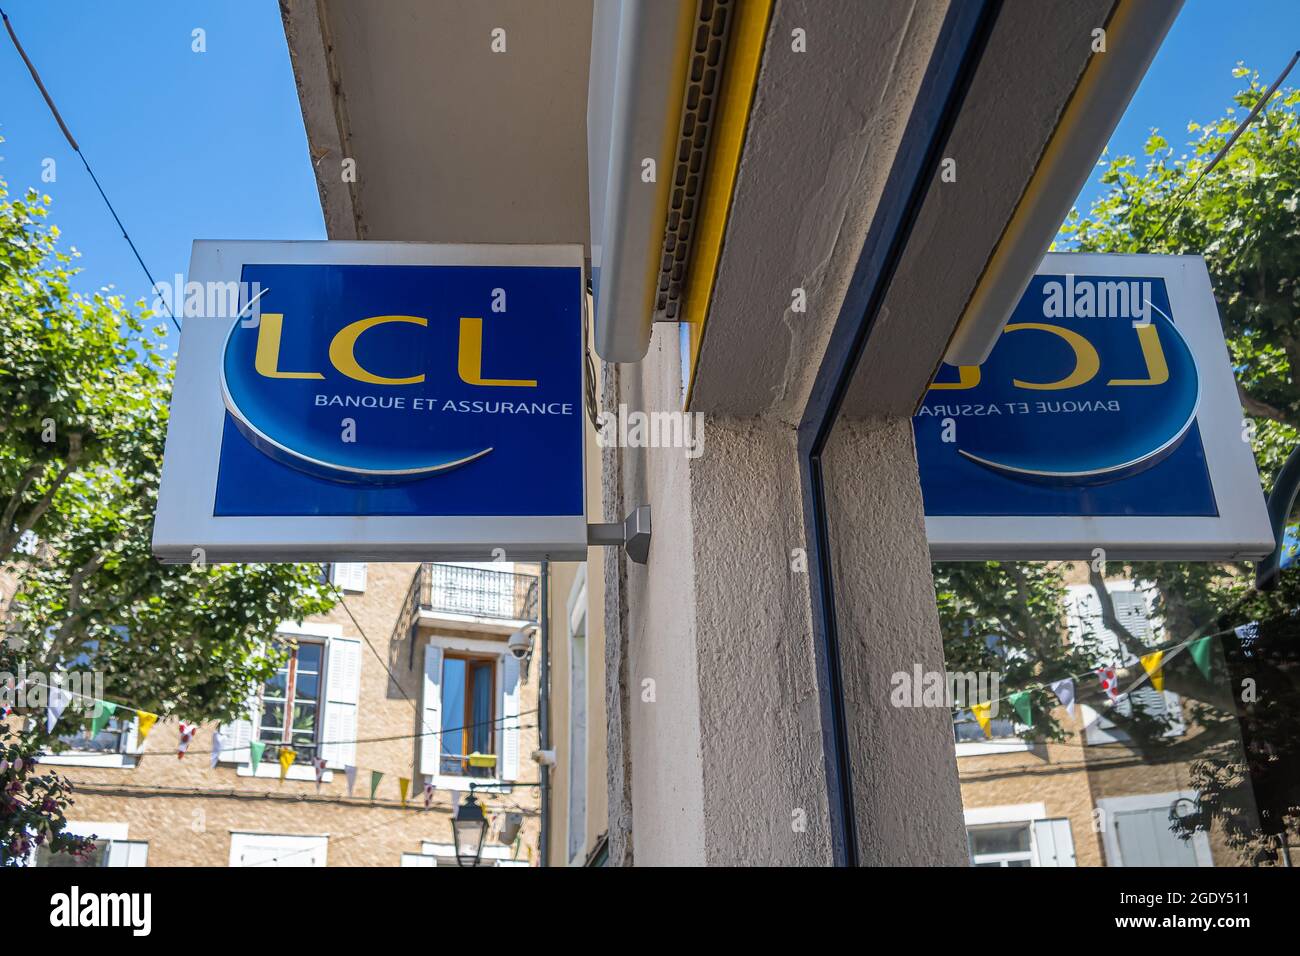 Sisteron, France - July 7, 2020: LCL is an abbreviation which means Le Credit Lyonnais. It is a major French financial services company. Stock Photo